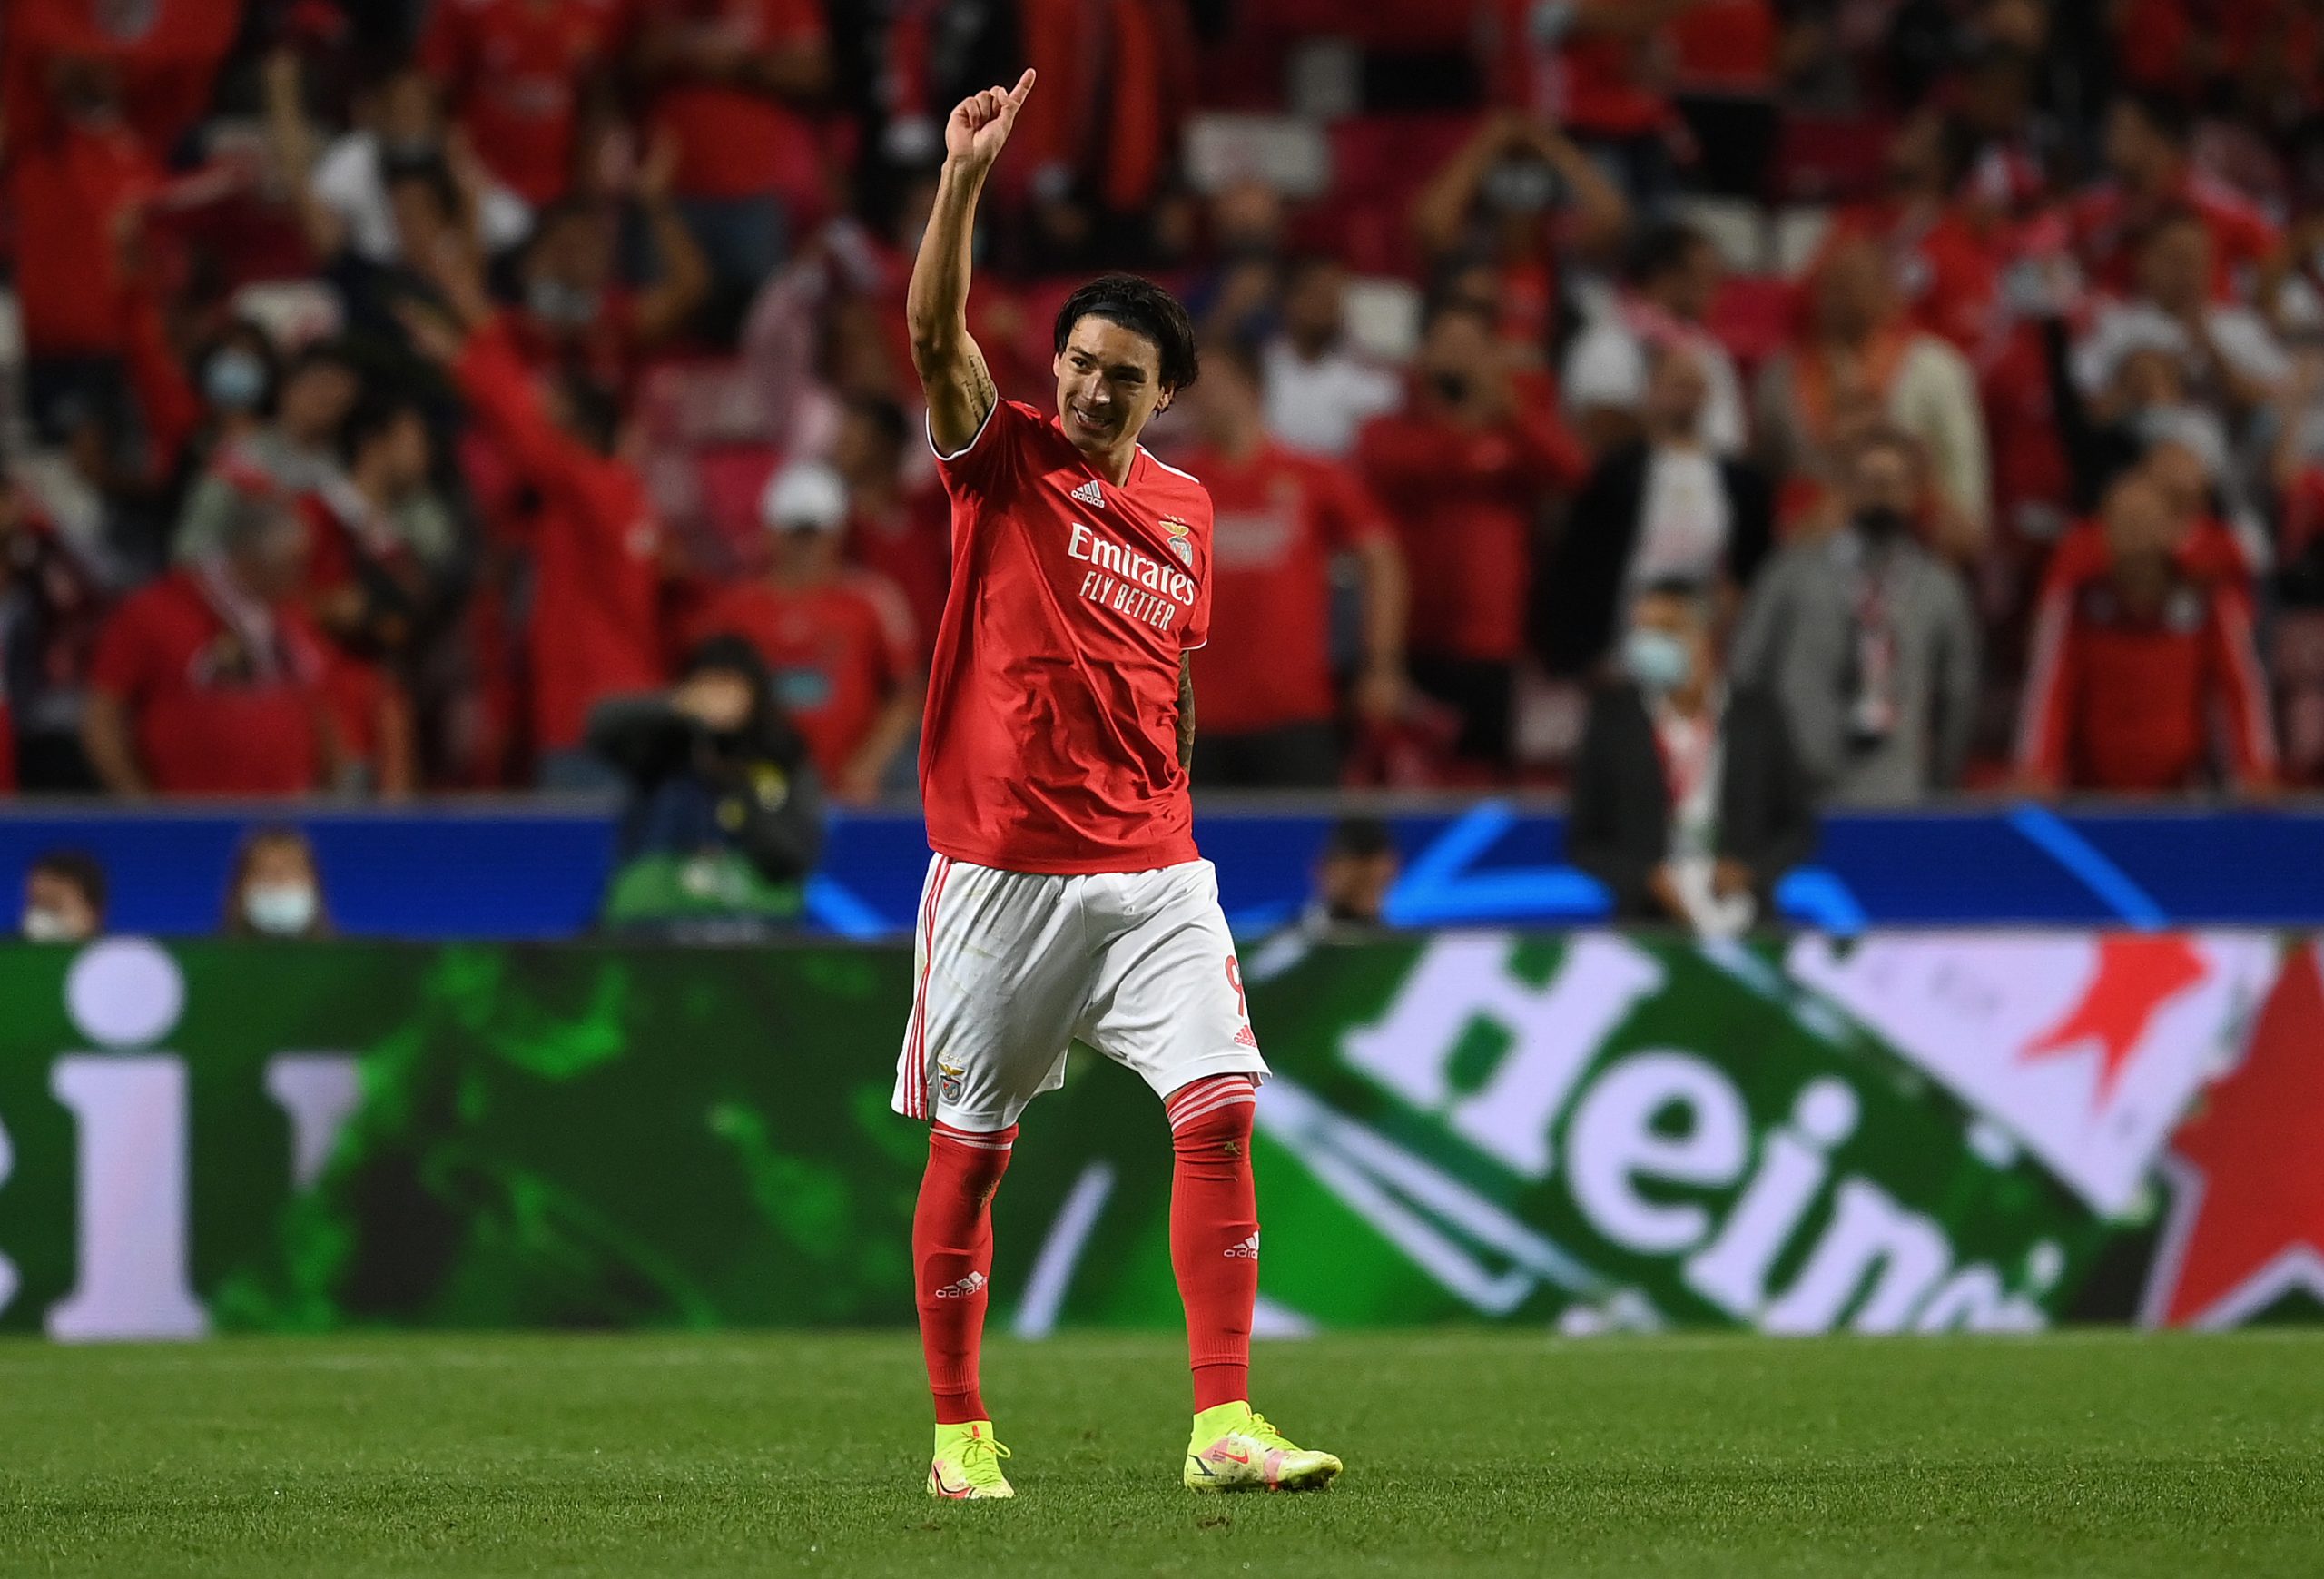 Darwin Nunez celebrates scoring the opening goal during the UEFA Champions League match between SL Benfica and FC Barcelona. (Photo by David Ramos/Getty Images)